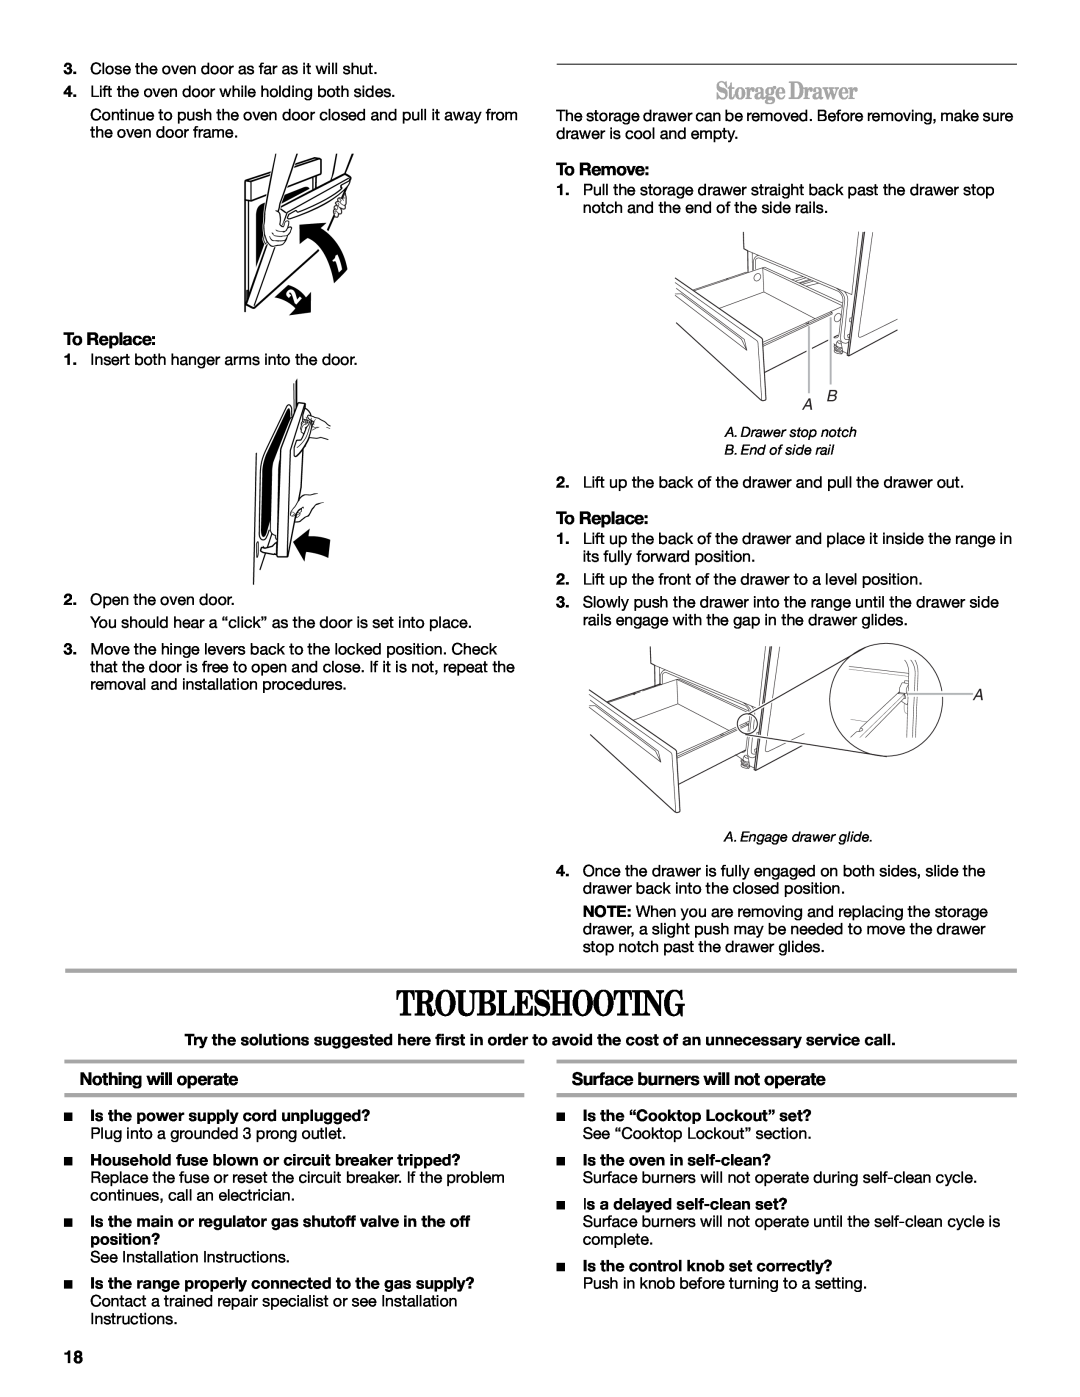 Whirlpool W10162212A manual Troubleshooting, StorageDrawer, To Replace, To Remove, Nothing will operate 